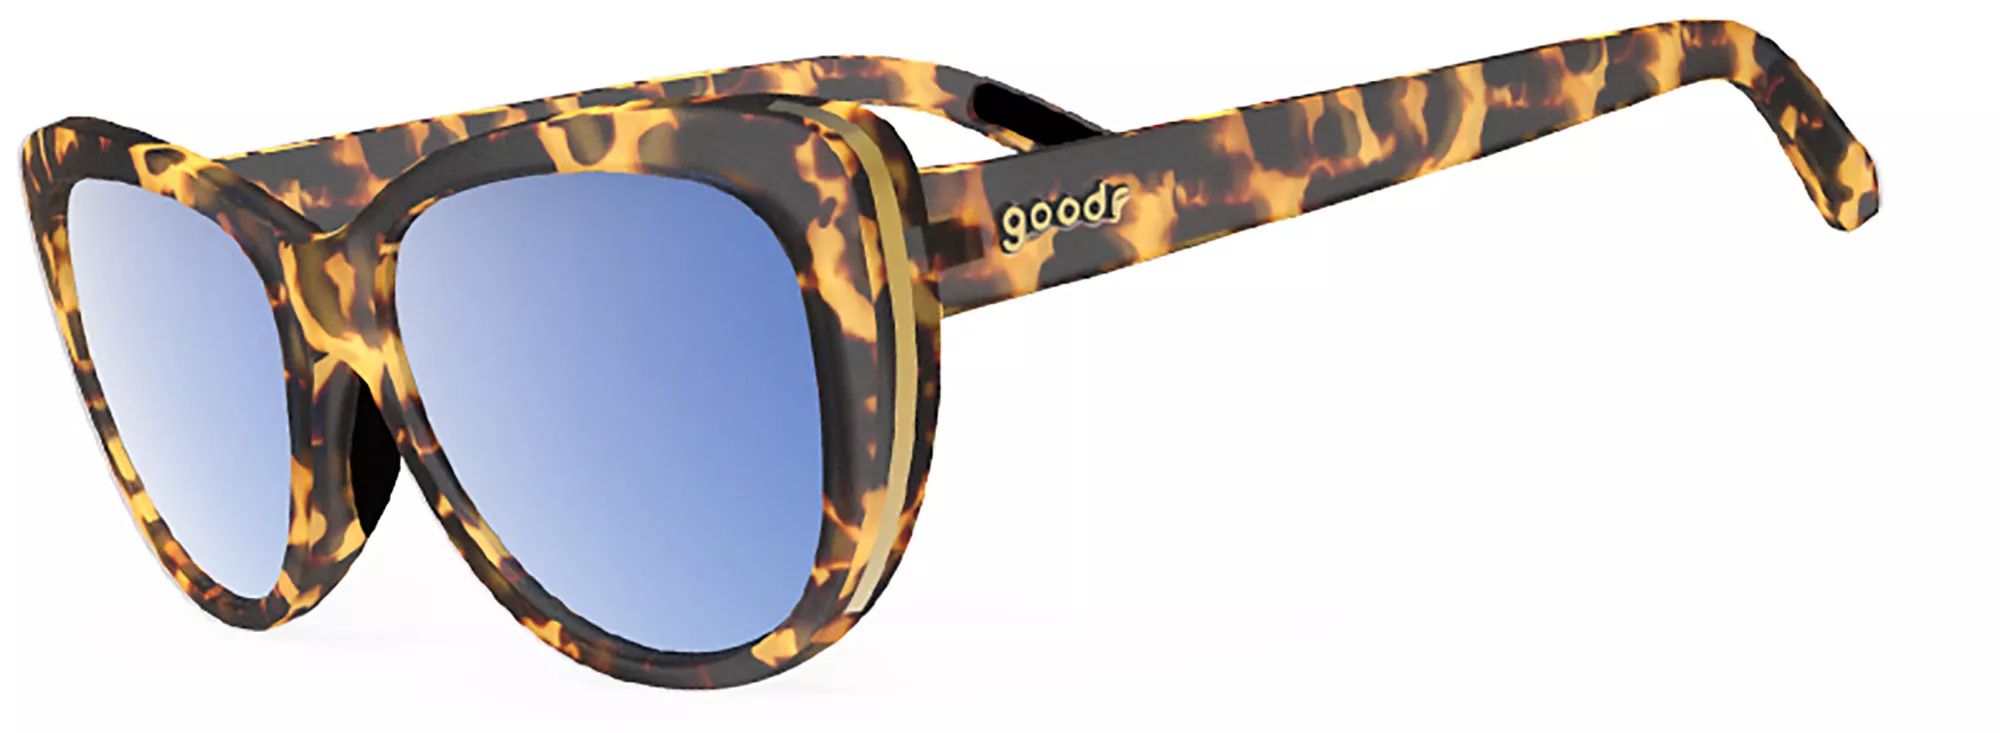 Goodr Fast As Shell Polarized Reflective Sunglasses, Women's | Dick's Sporting Goods